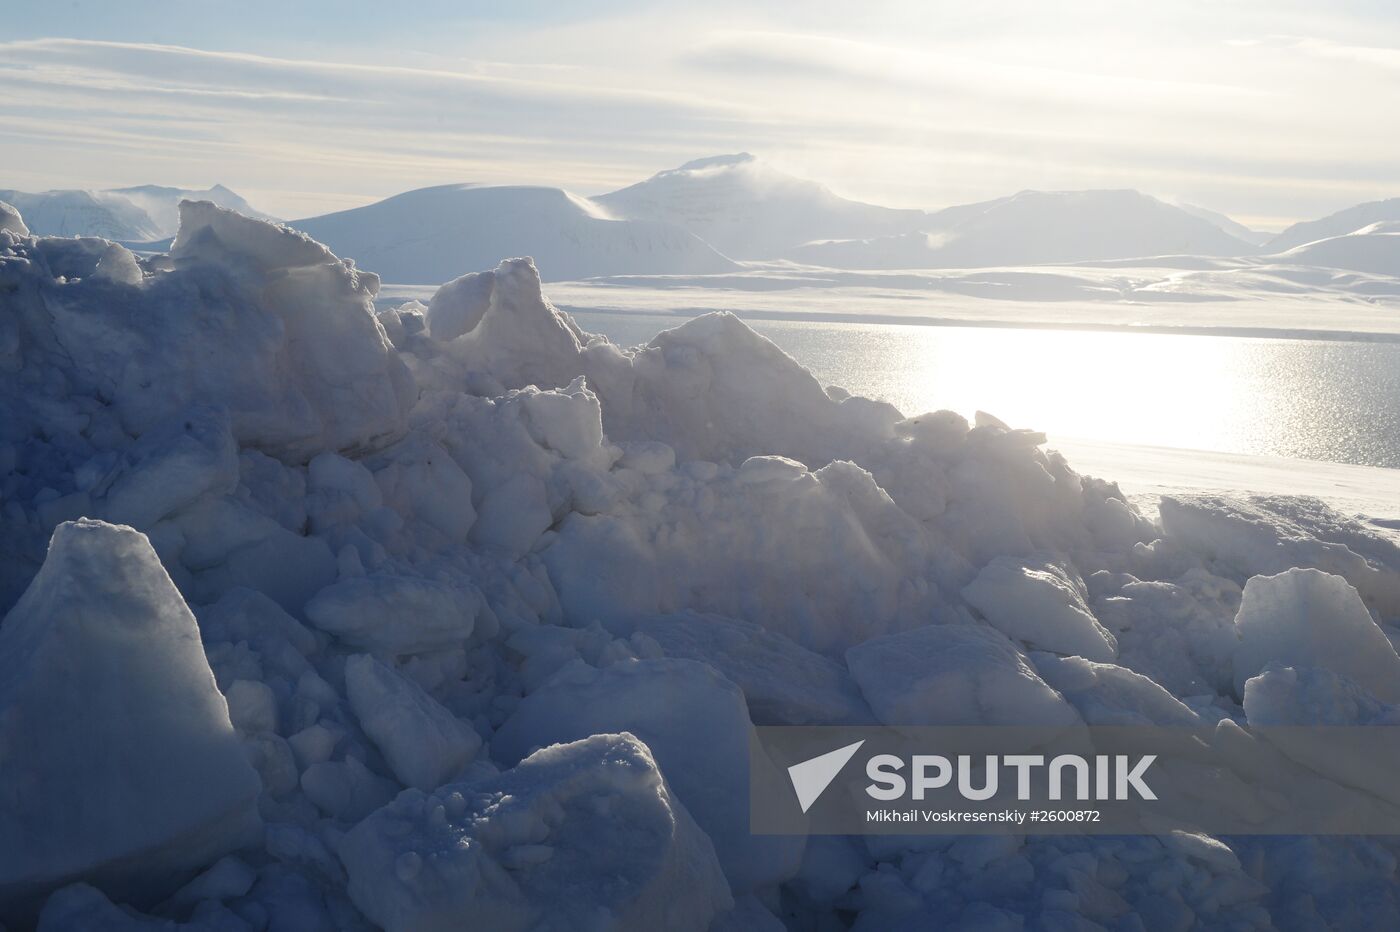 Polar expedition to Spitsbergen conducted as part of Arctica 2015 project